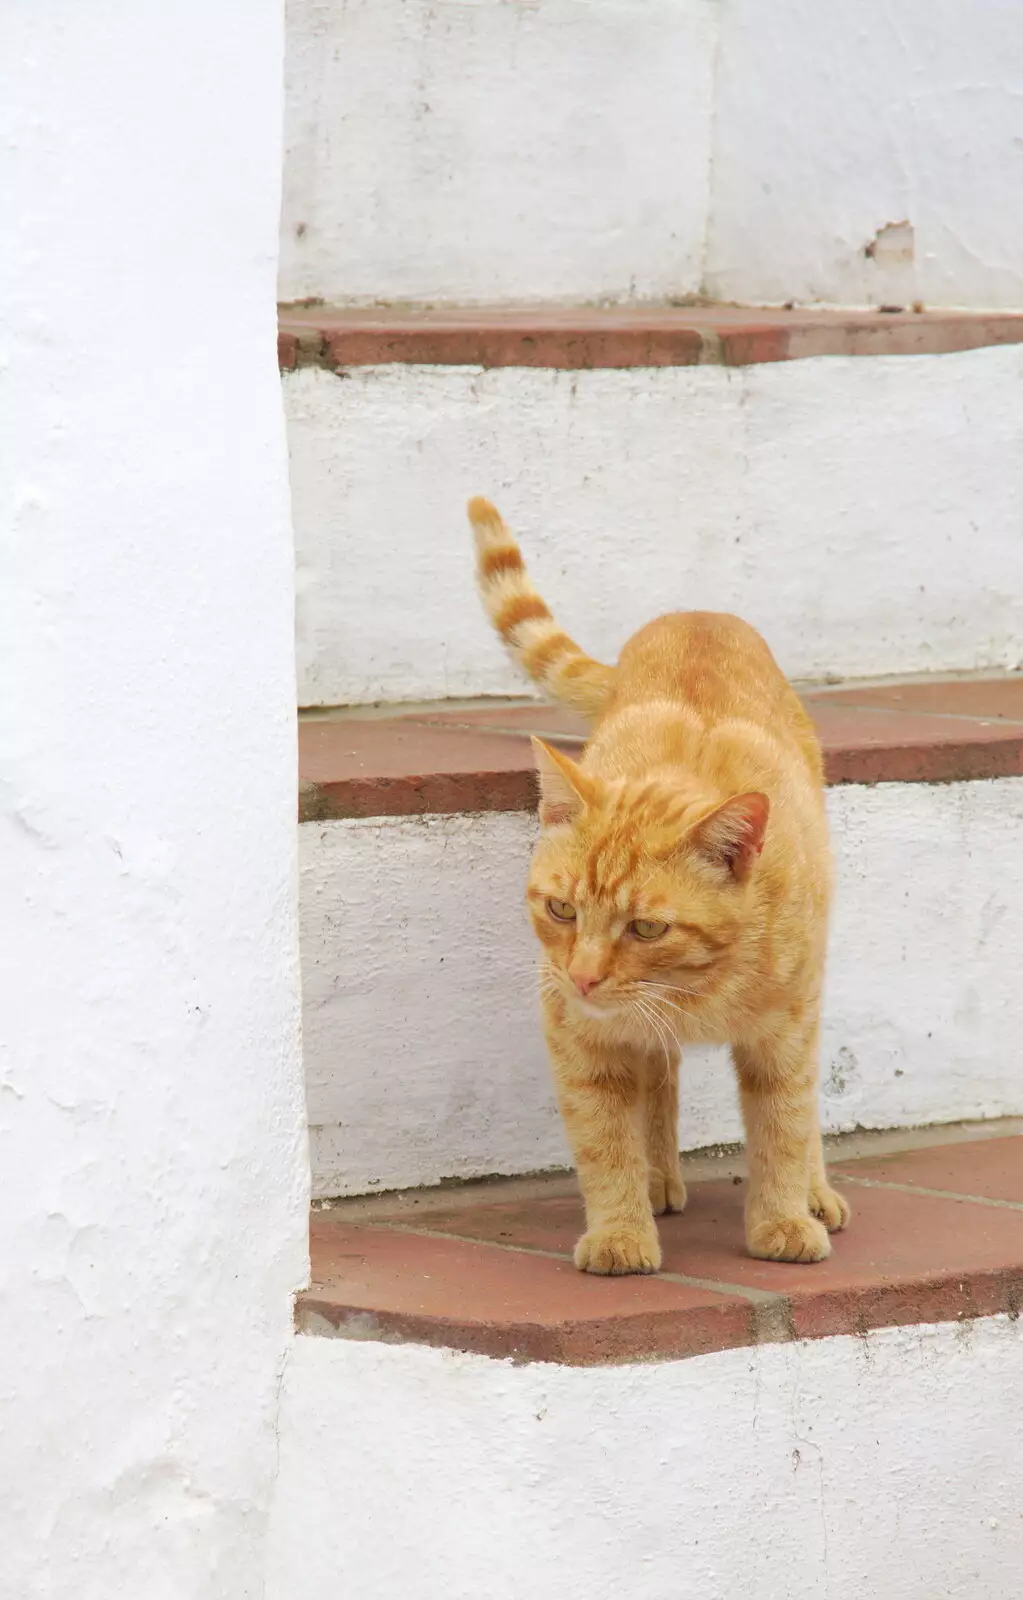 A stocky, stripey, ginger cat, from The Caves of Nerja, and Frigiliana, Andalusia, Spain - 18th April 2019